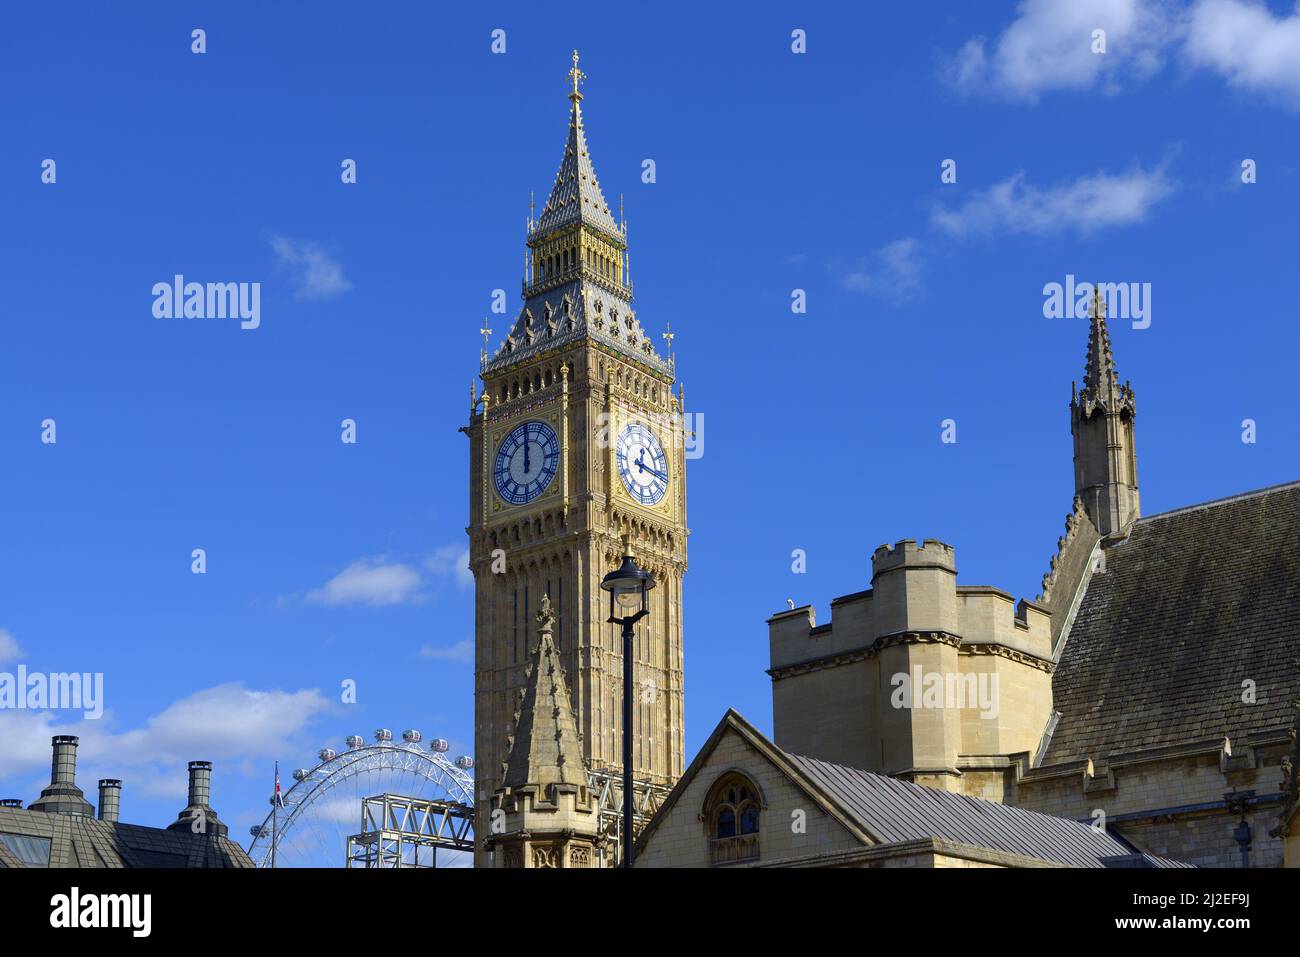 London, England, UK. Big Ben / Elizabeth Tower, Houses of Parliament, Westminster. Clock faces showing different times during repairs - March 2022 Stock Photo